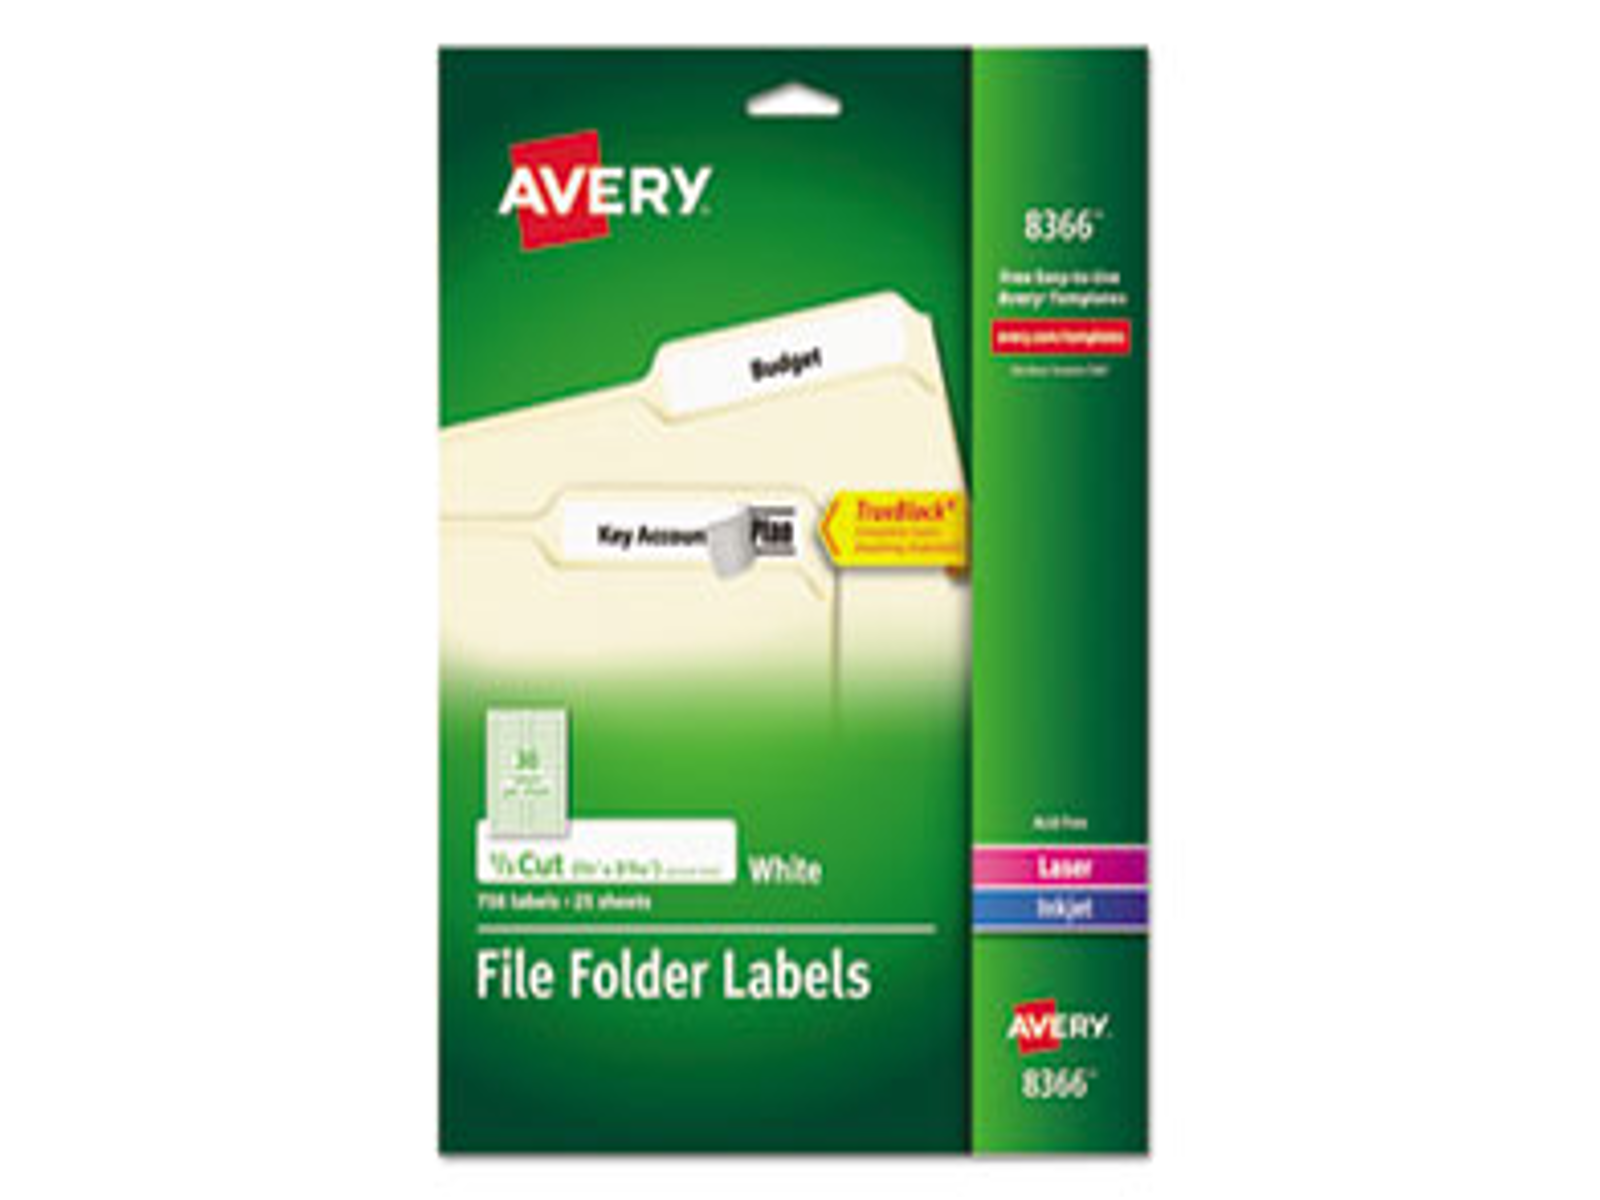 AVERY PRODUCTS PERMANENT
TRUEBLAOCK FILE FOLDER LABELS
WITH SURE FEED TECHNOLOGY 0.66
X 3.44, WHITE, 30/SHEET, 25
SHEETS/PACK